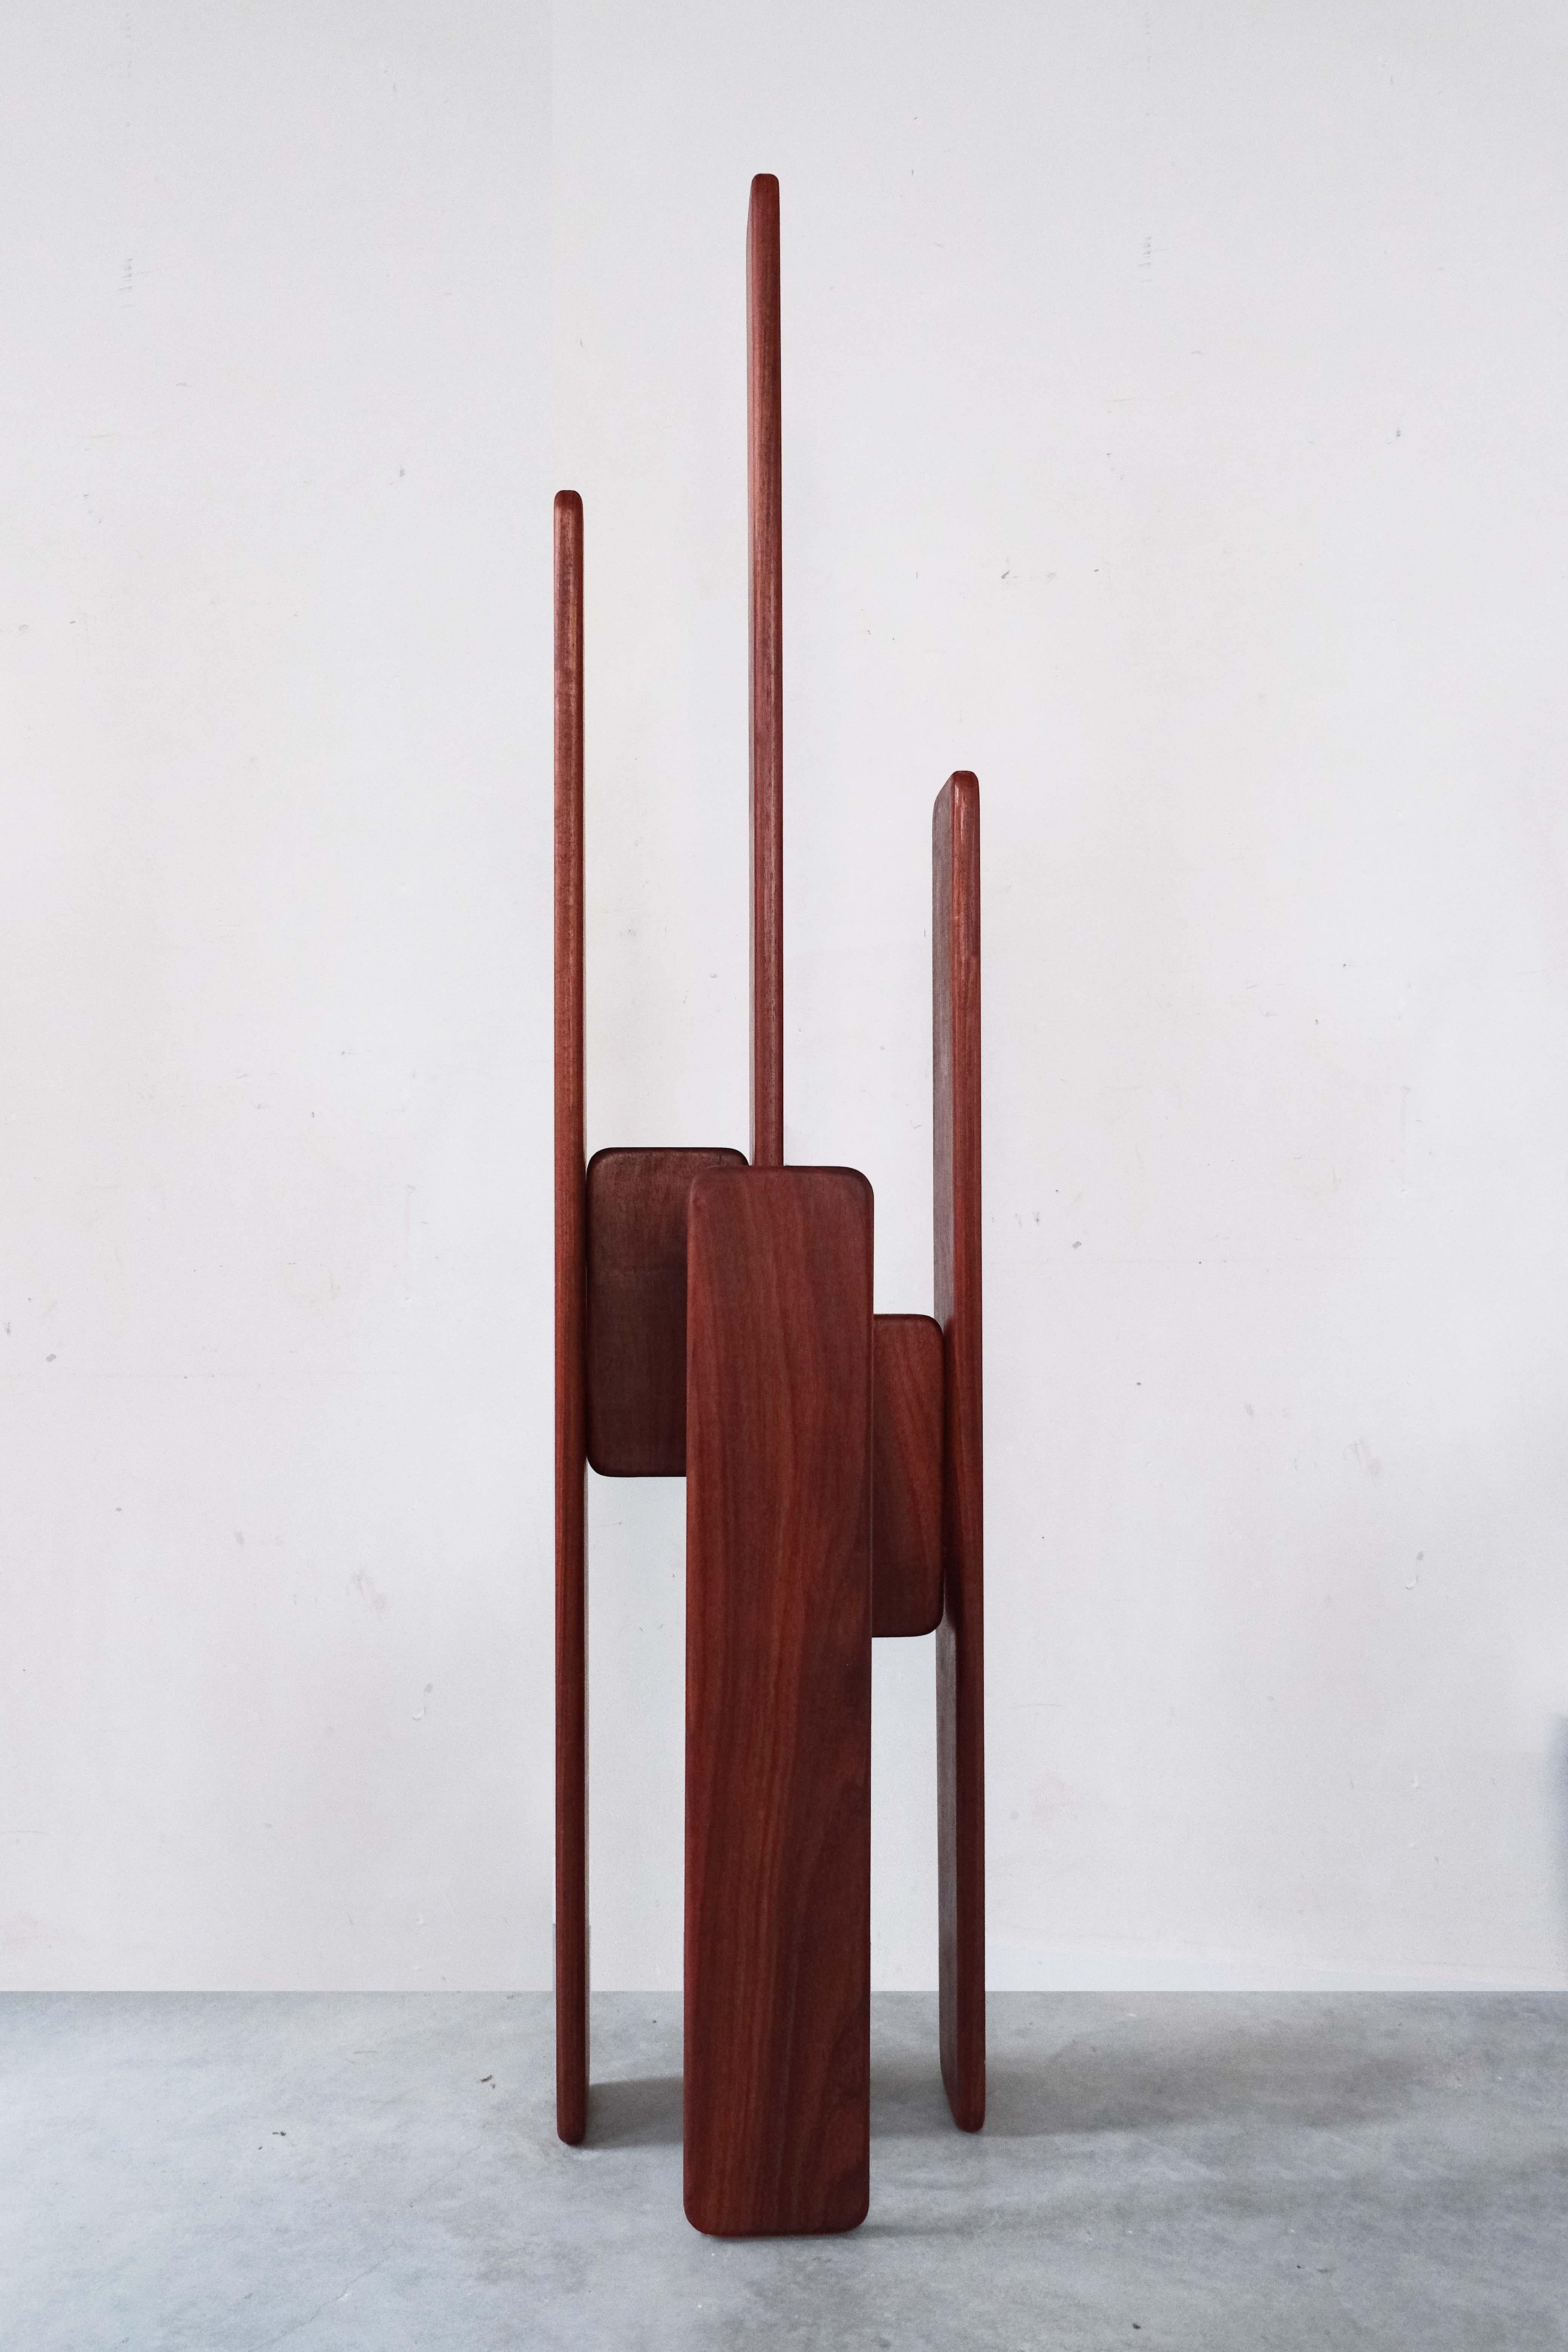 Coat Rack by Atelier Ledure
Dimensions: W 38 x D 34 x H 175 cm.
Materials: Tropical Wood, Hand-Waxed finish

The coat rack is a sculptural element made to hang your clothes. It can be used for private clients as well as for retail purposes. The